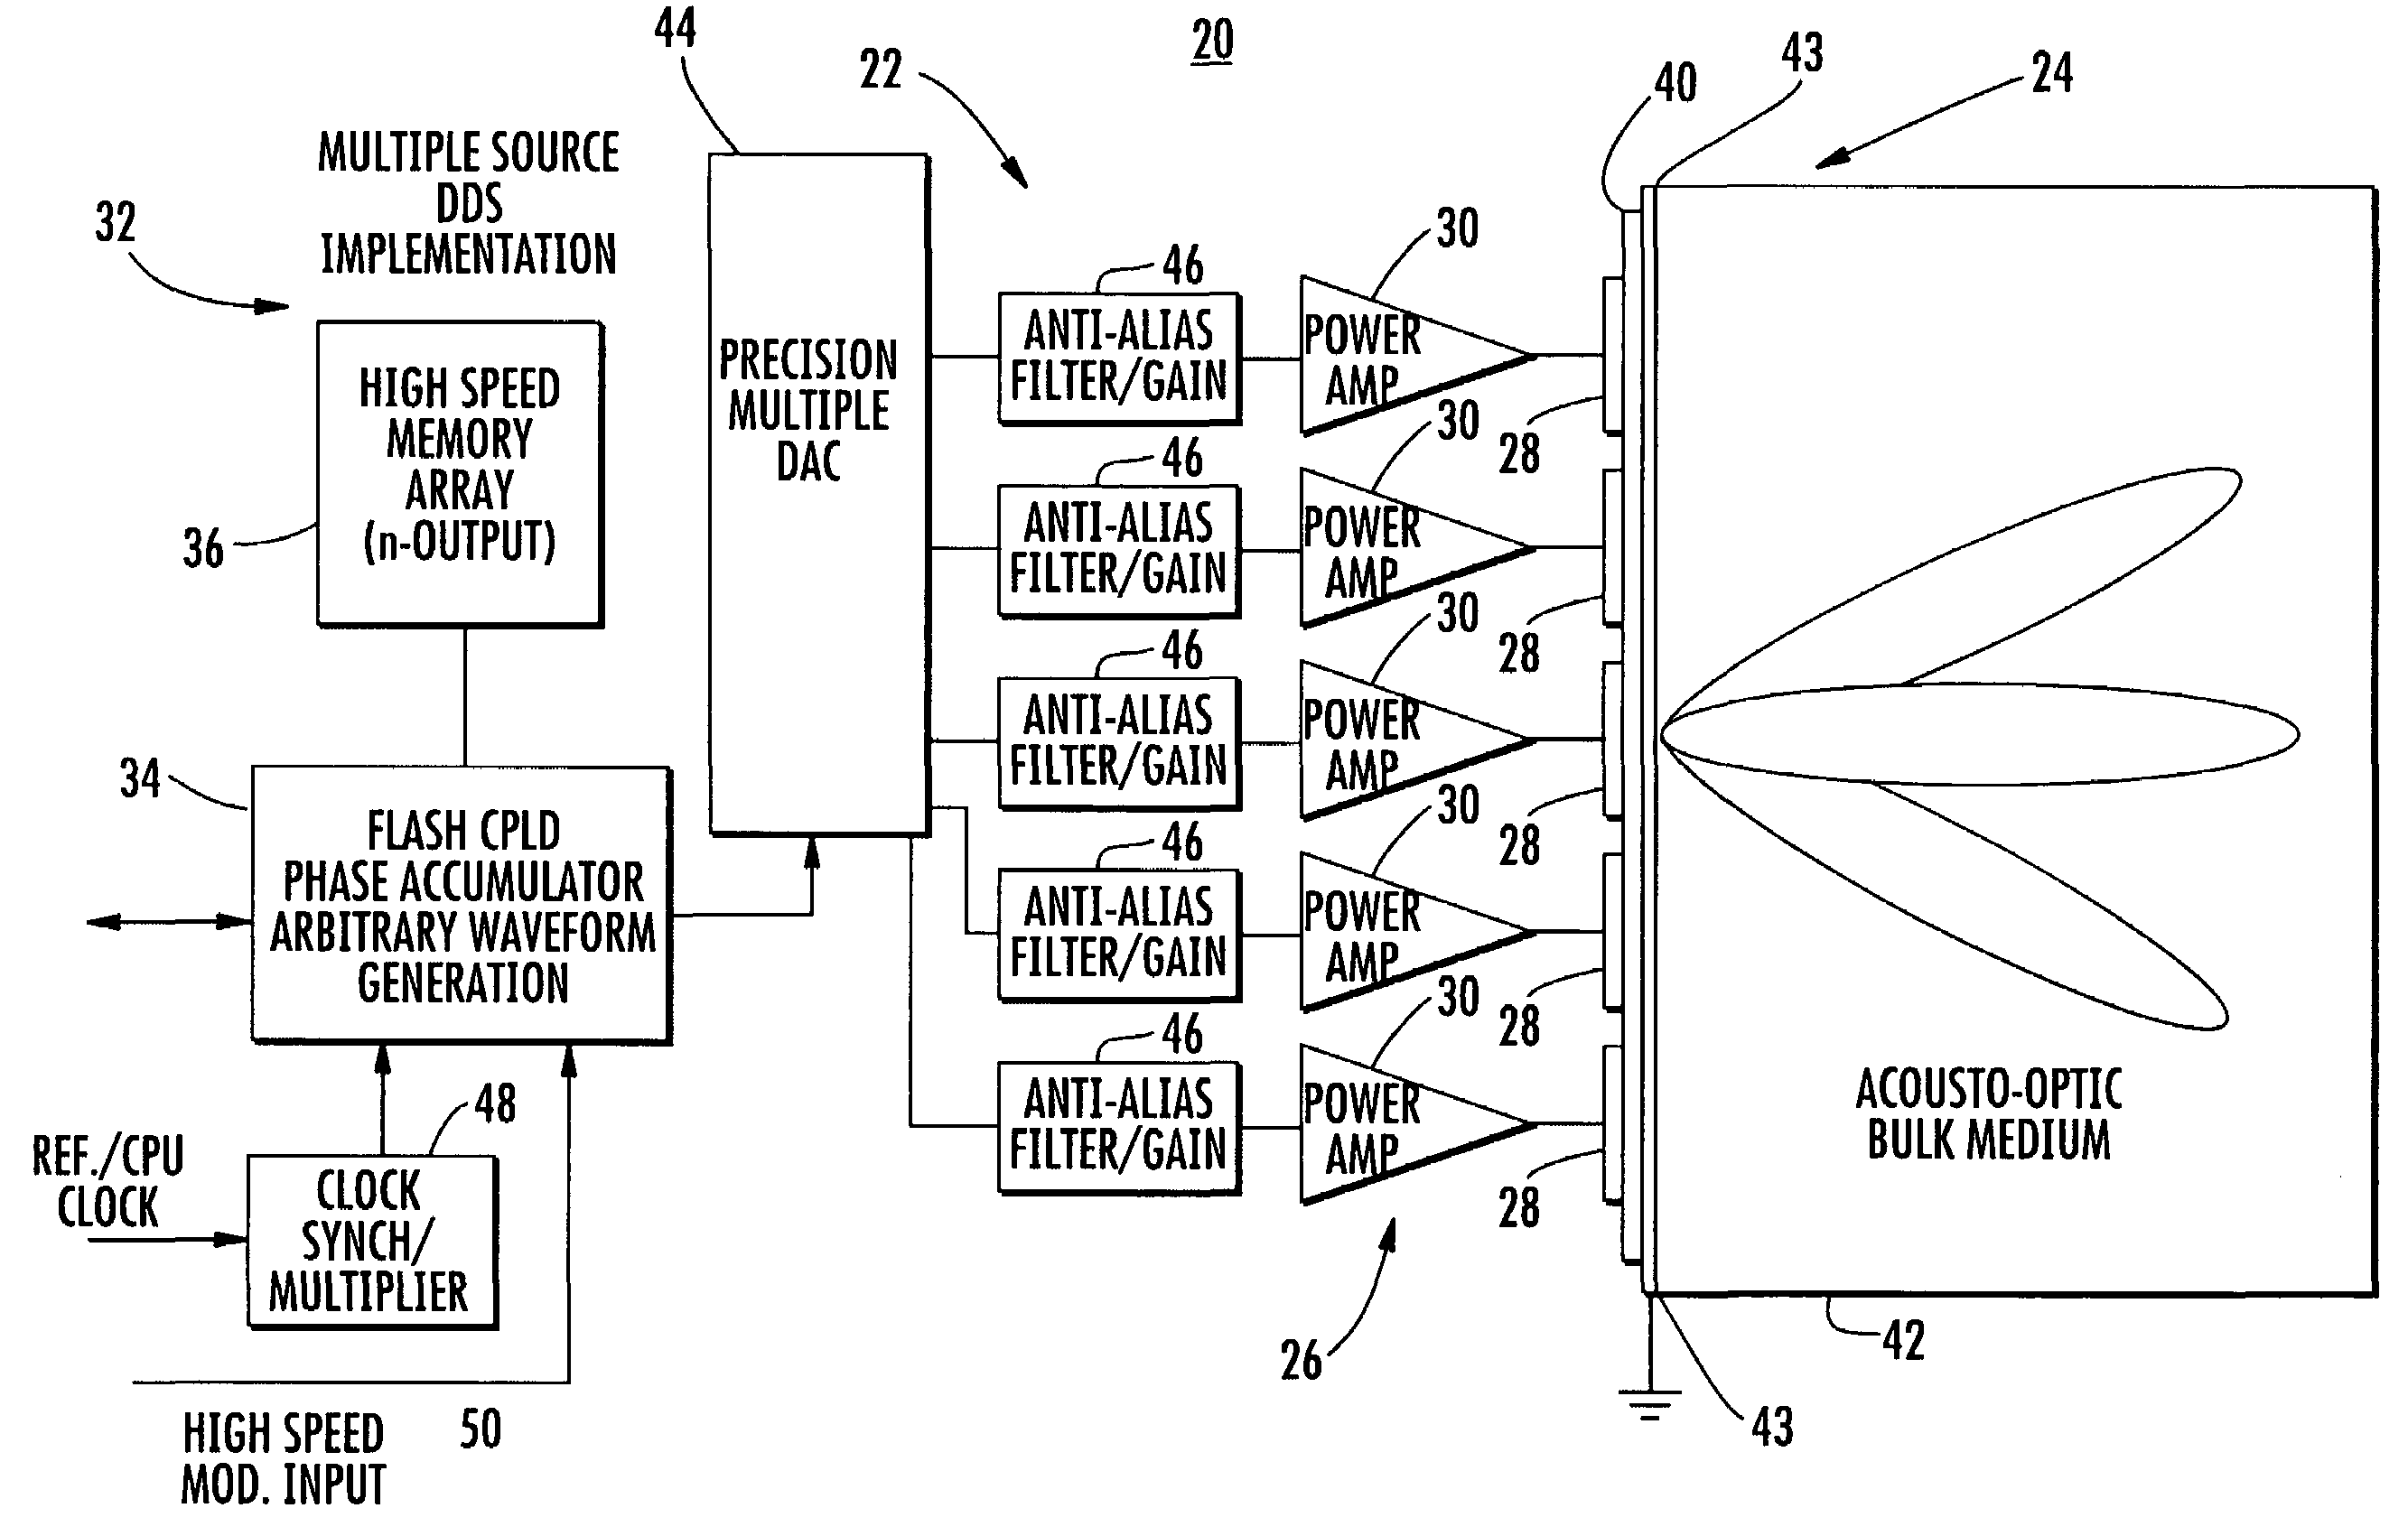 RF phase modulation technique for performing acousto-optic intensity modulation of an optical wavefront